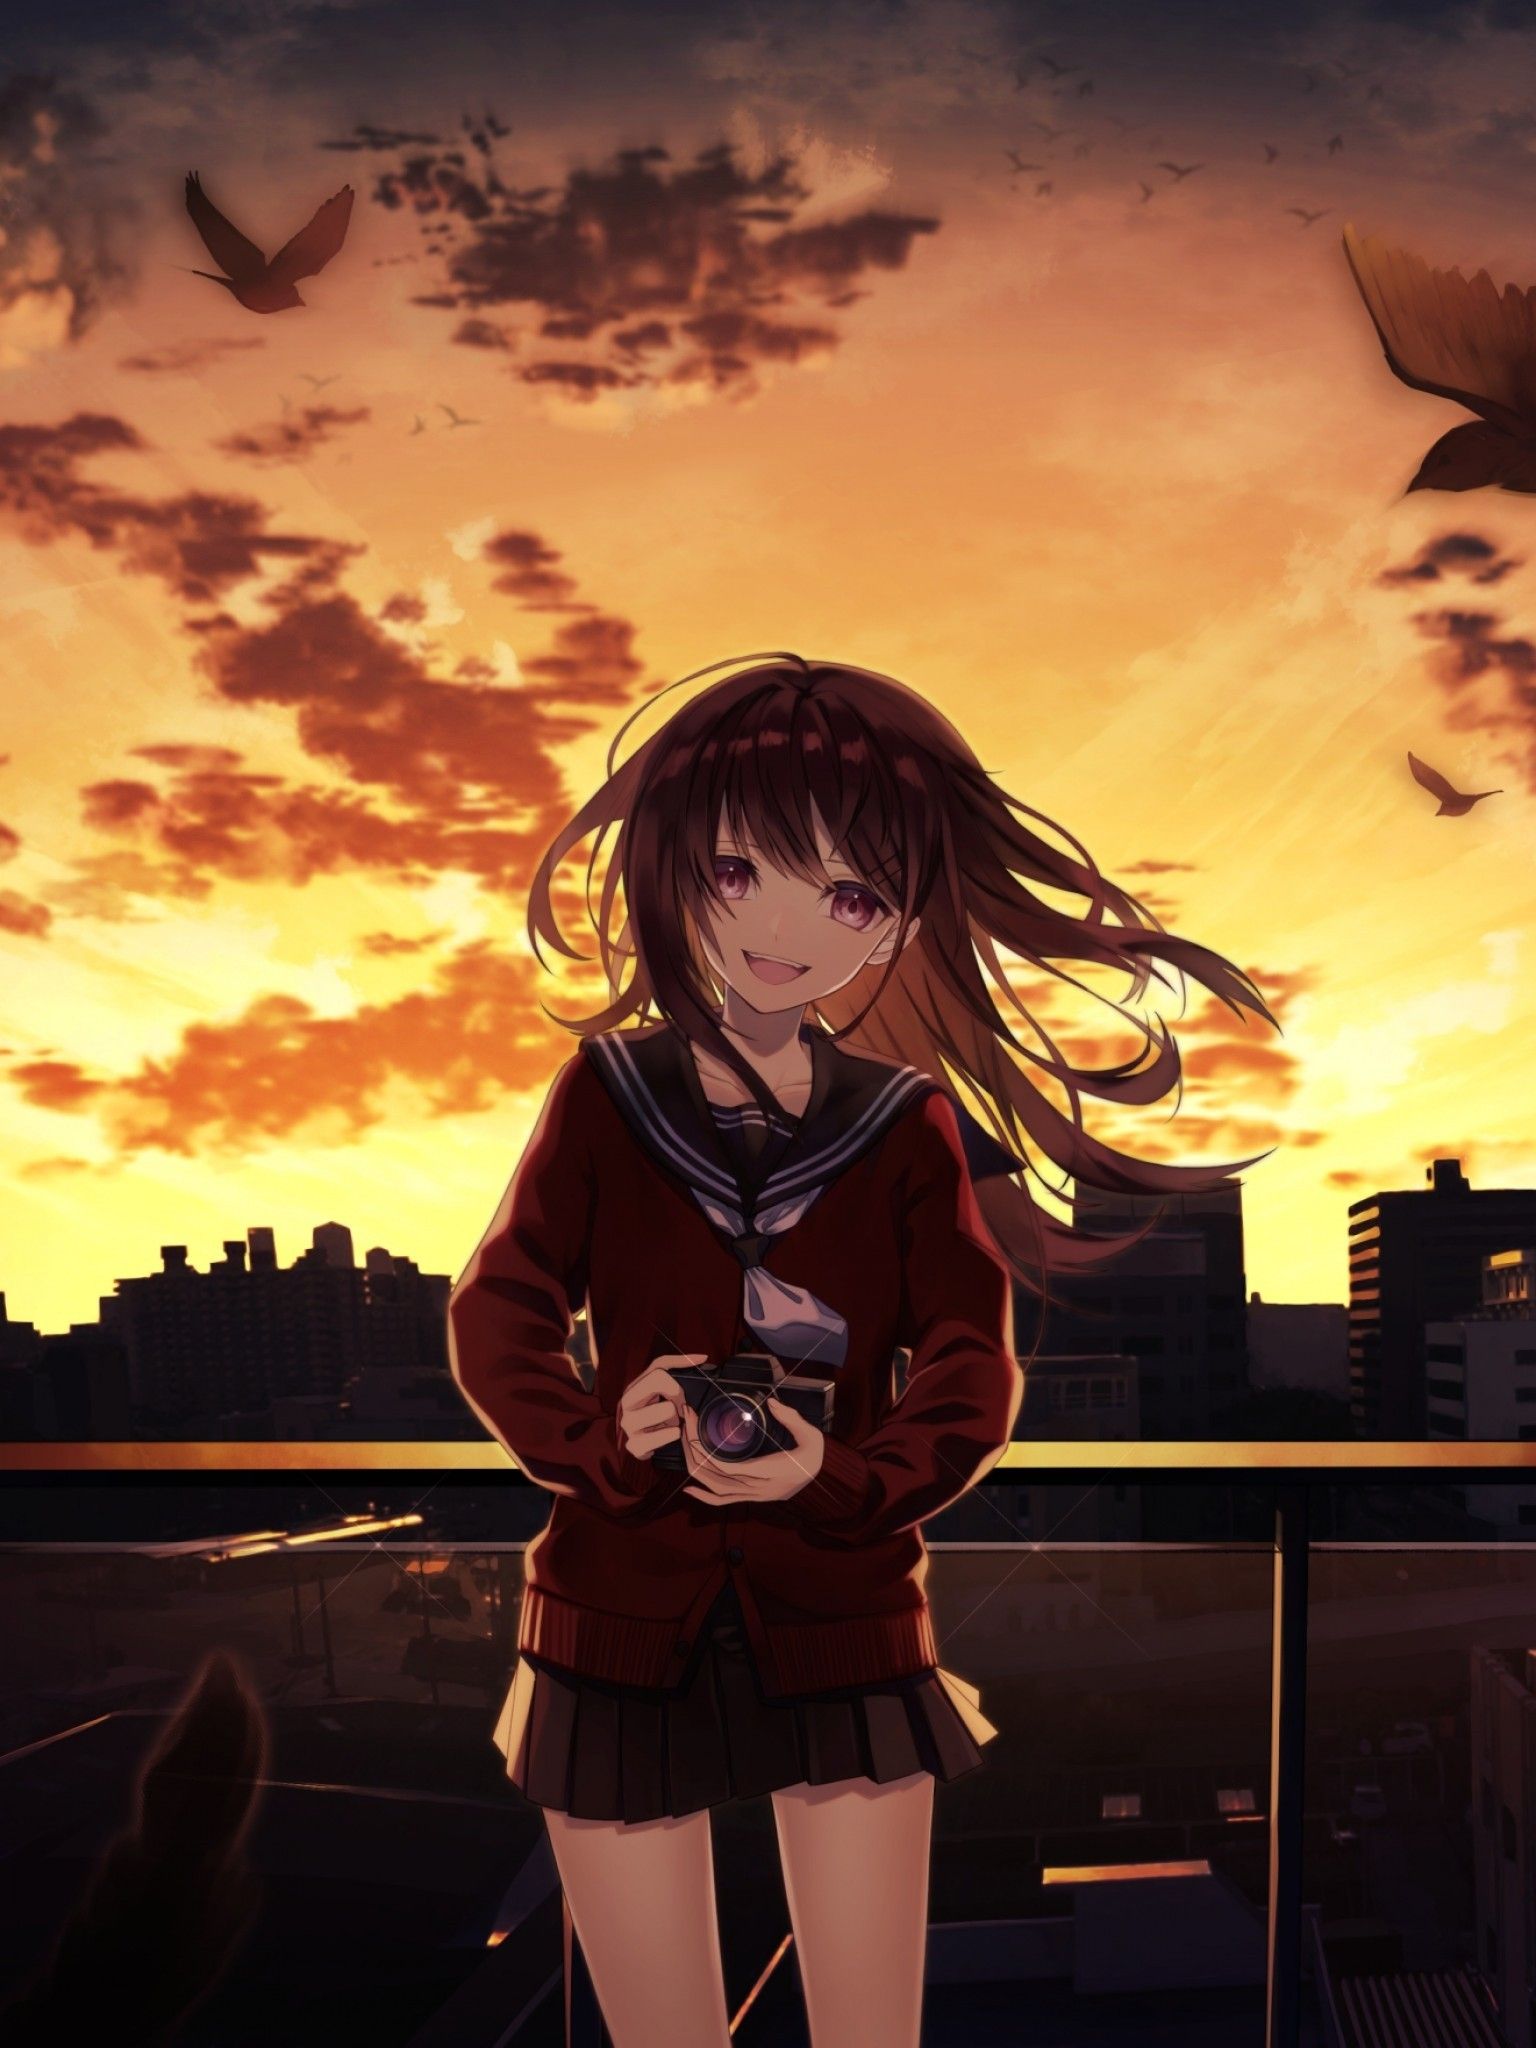 Download 1536x2048 Anime Girl, Smiling, Sunset, Crows, Camera, Buildings, Clouds Wallpaper for Apple iPad Mini, Apple IPad 4